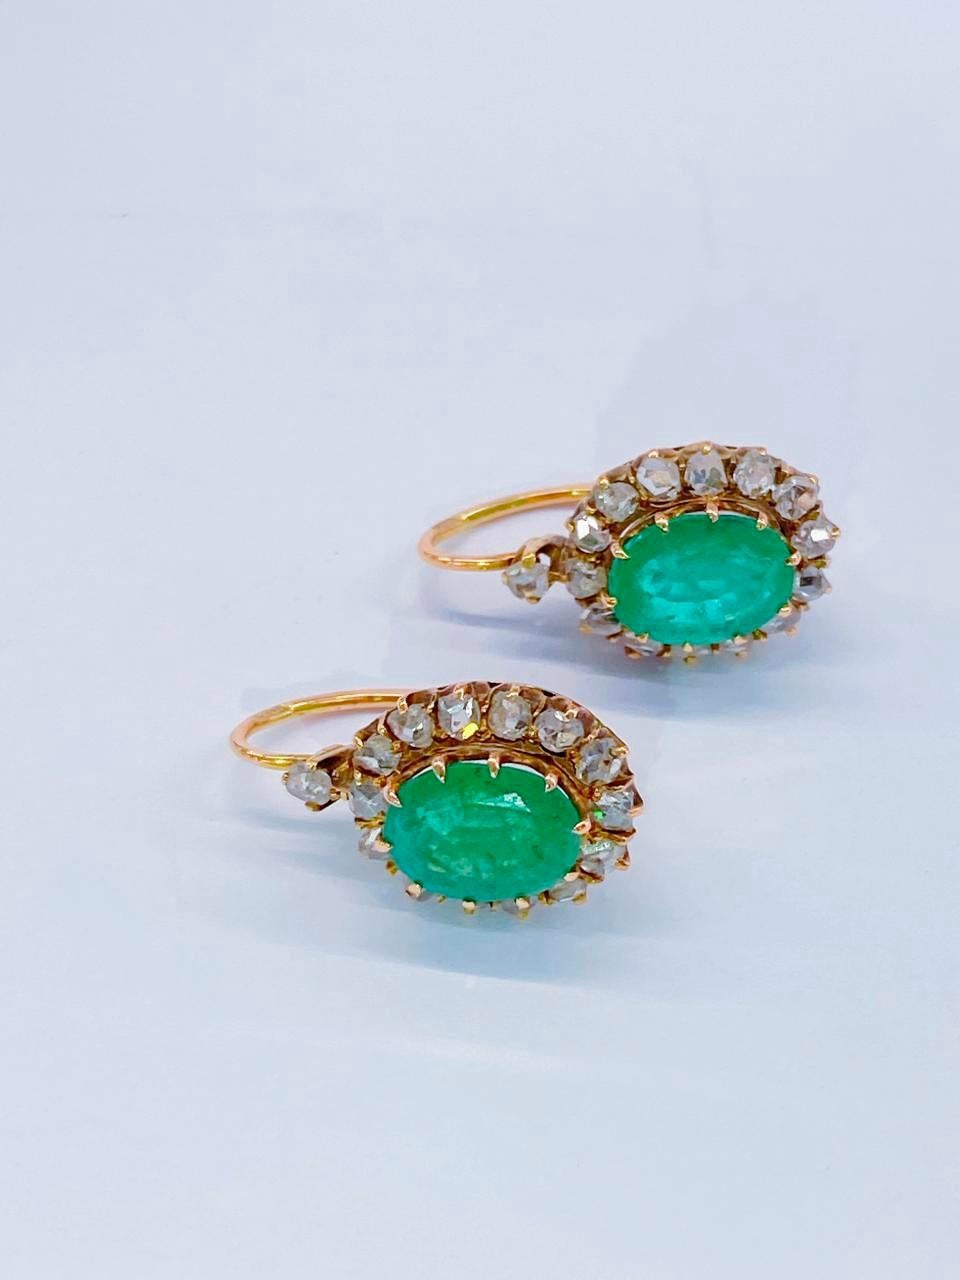 Antique Russian emerald earrings centered with natural oval cut green emerald with a diameter of 9mm×7mm estimate weight 4 carats flanked with rose cut diamonds total earrings length 2cm hall marked 56 imperial Russian gold standard and st